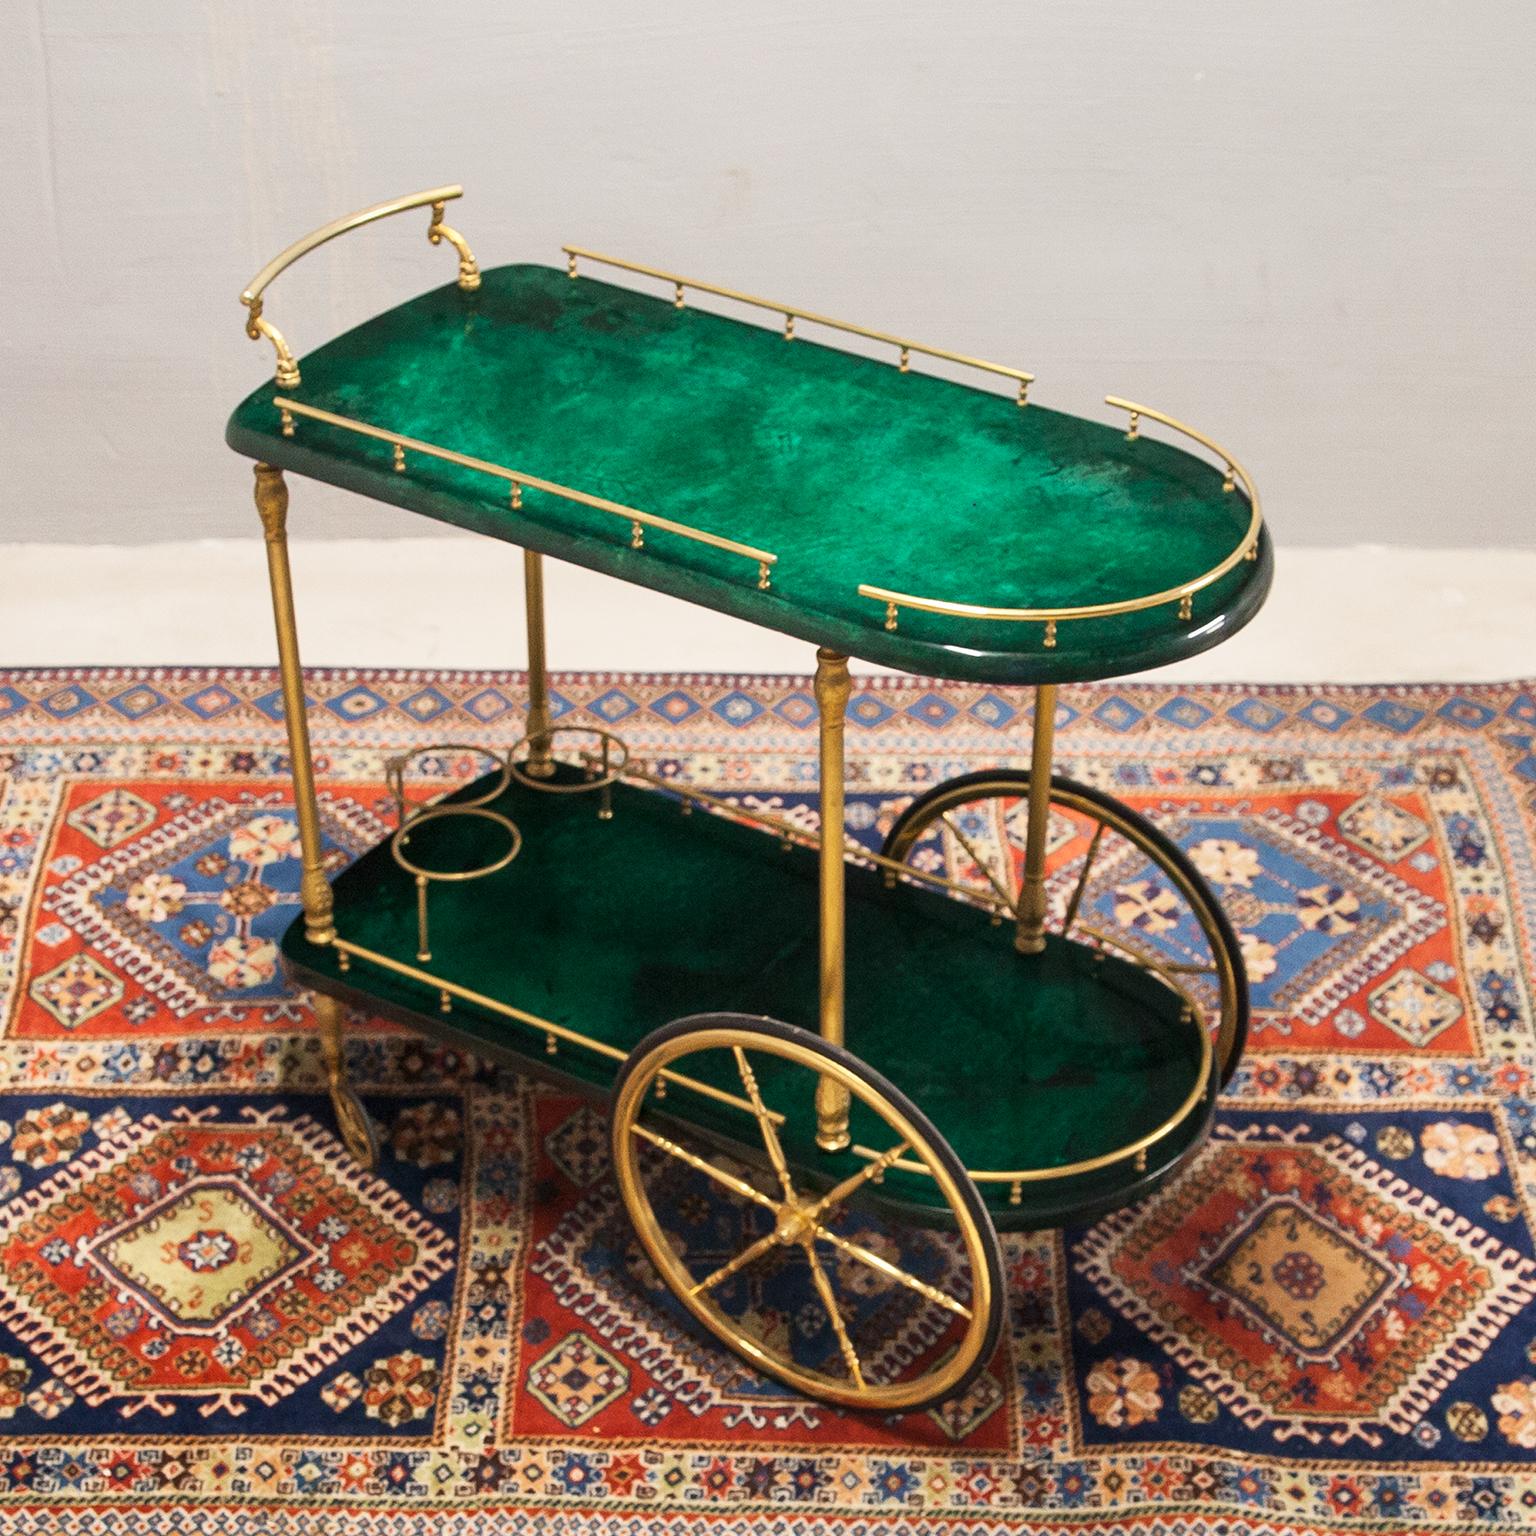 Bar Cart made by Aldo Tura in green lacquered goatskin and a bottle holder from 1960s, in excellent condition, new polished, no scratches.
Along with artists like Piero Fornasetti and Carlo Bugatti, Aldo Tura (1909-1963) definitely belonged to the